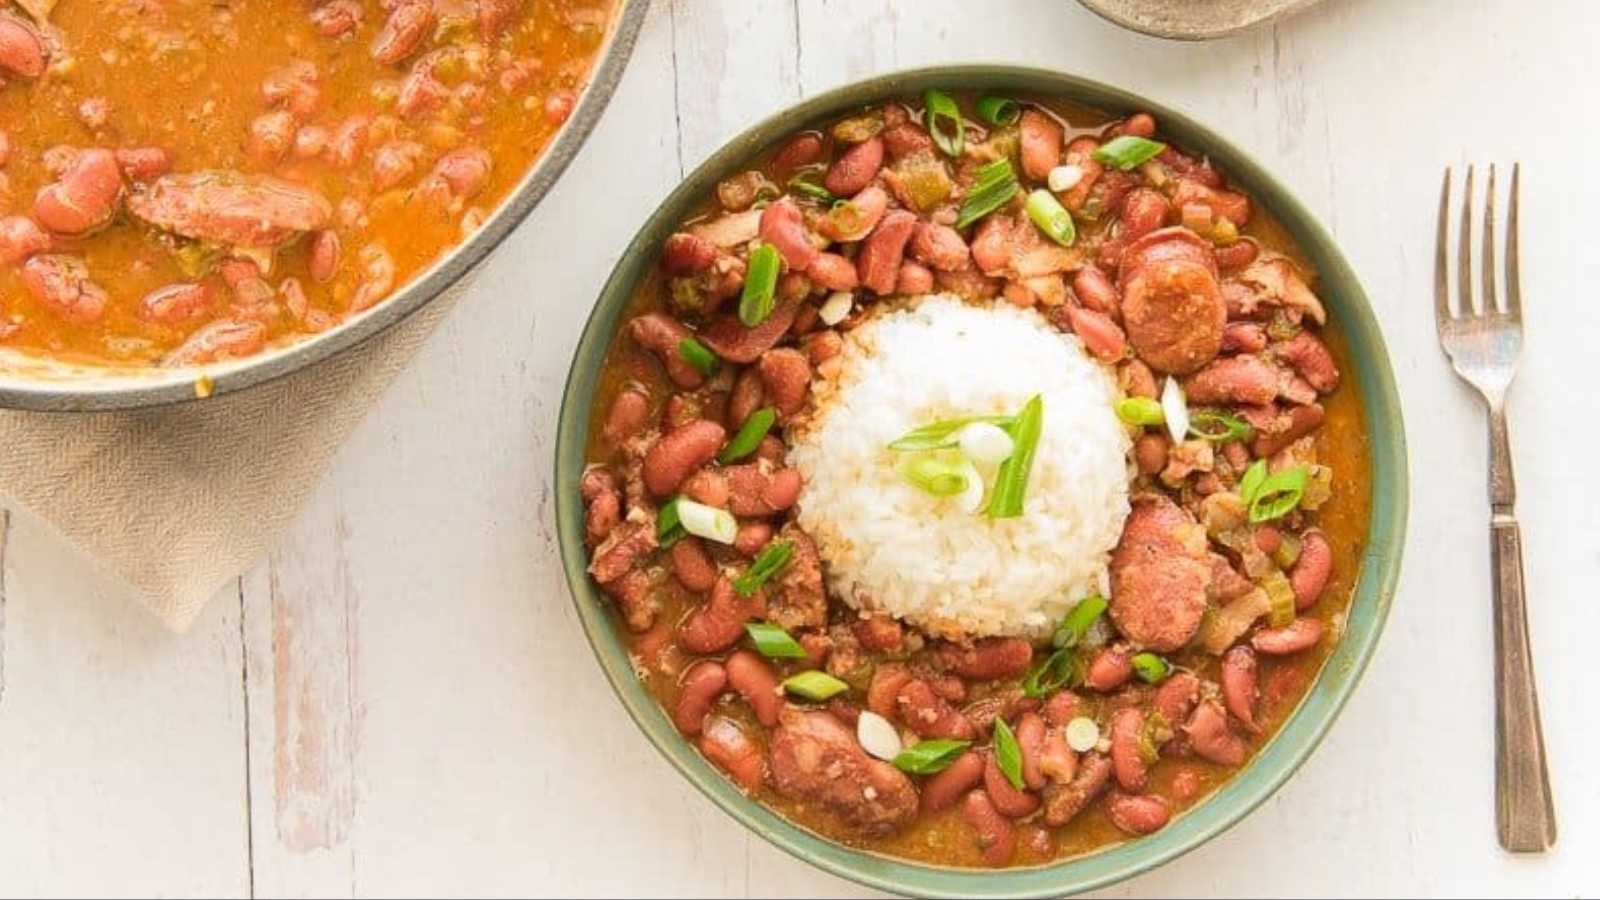 Red beans and smoked meats with rice toppings in a bowl.